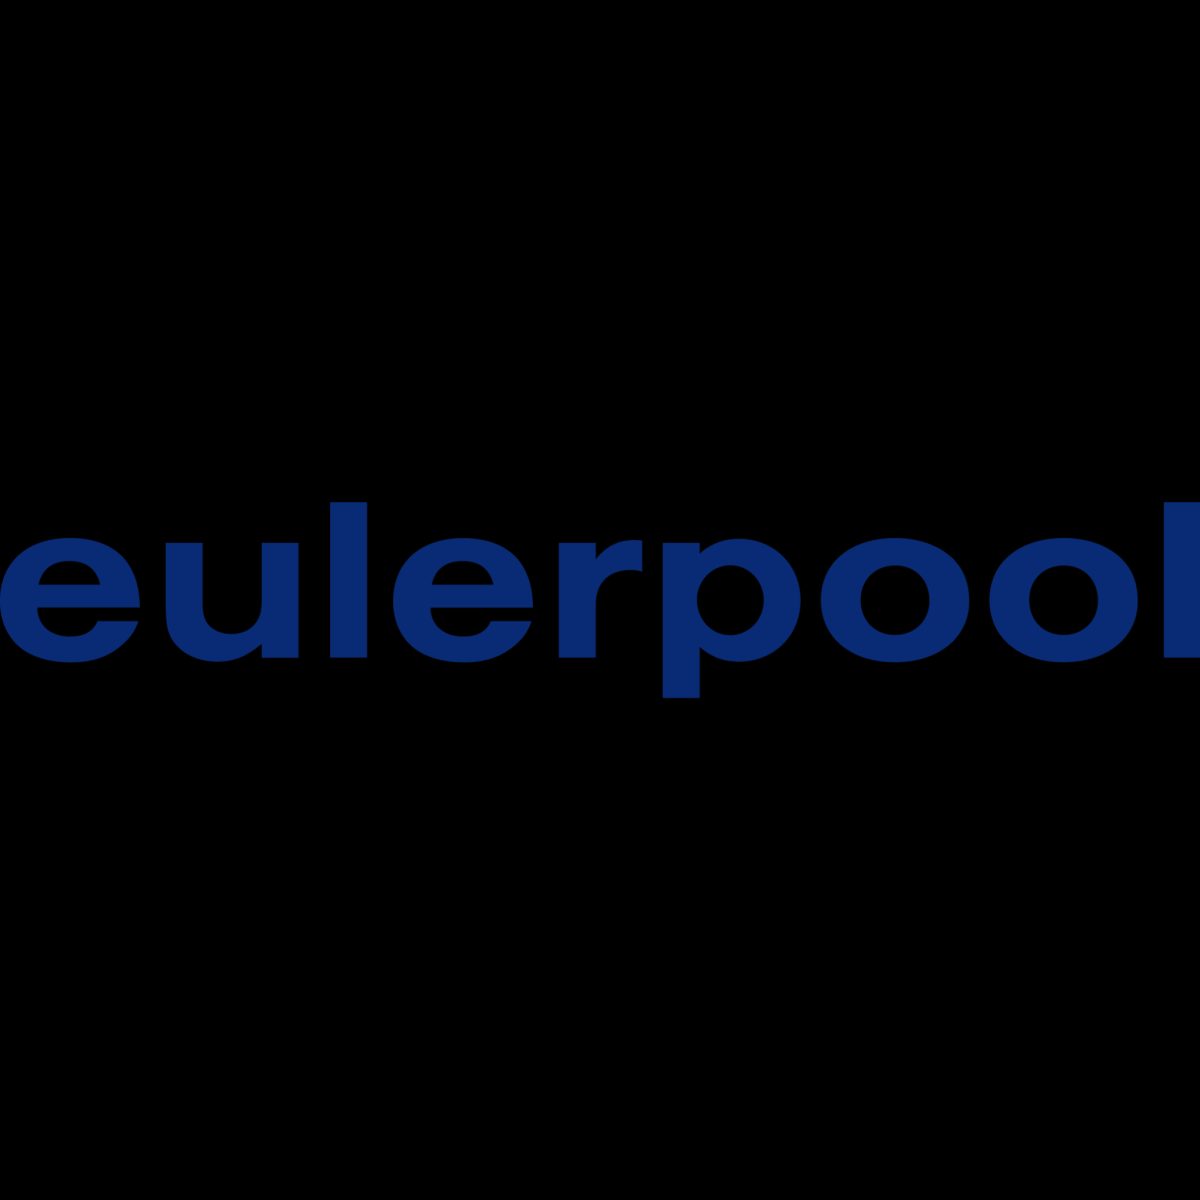 Eulerpool Research Systems / Jakob Management CH GmbH